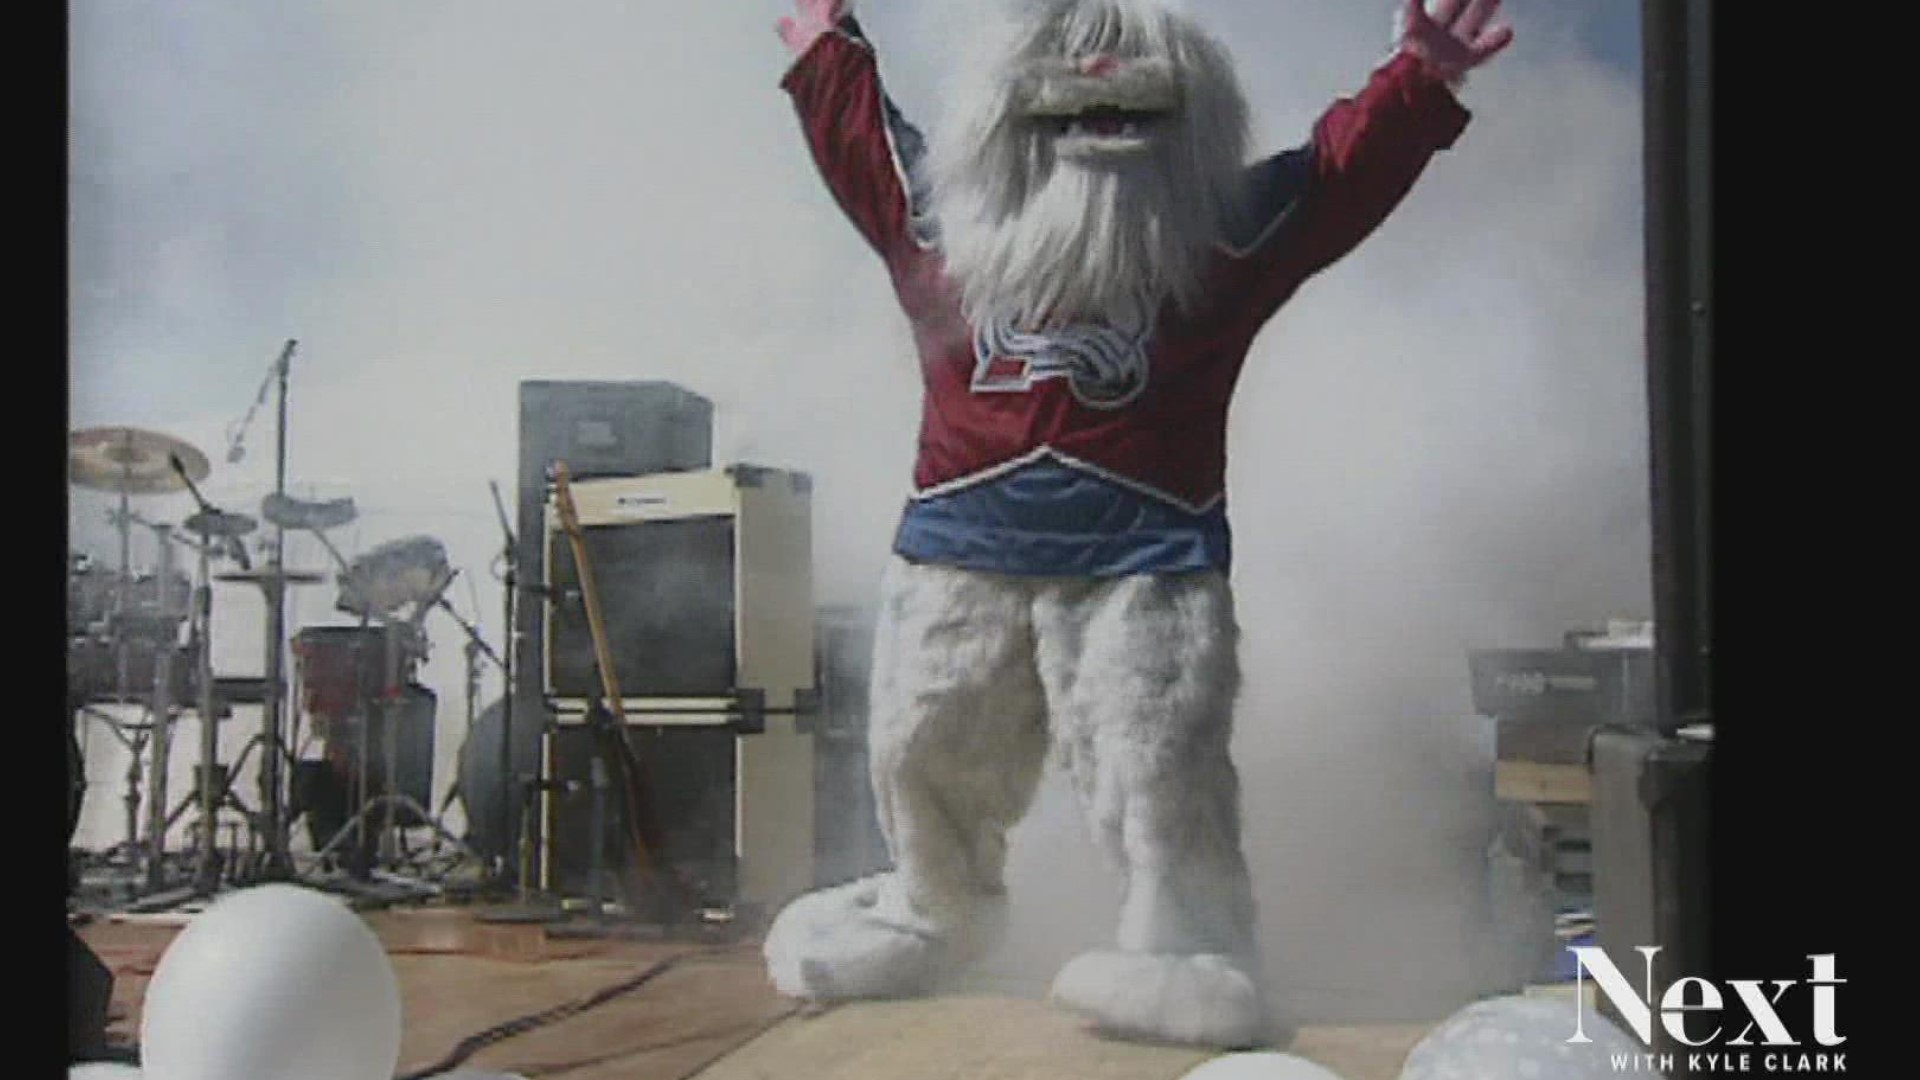 Before Bernie, there was an abominable snowman named Howler who entertained fans.